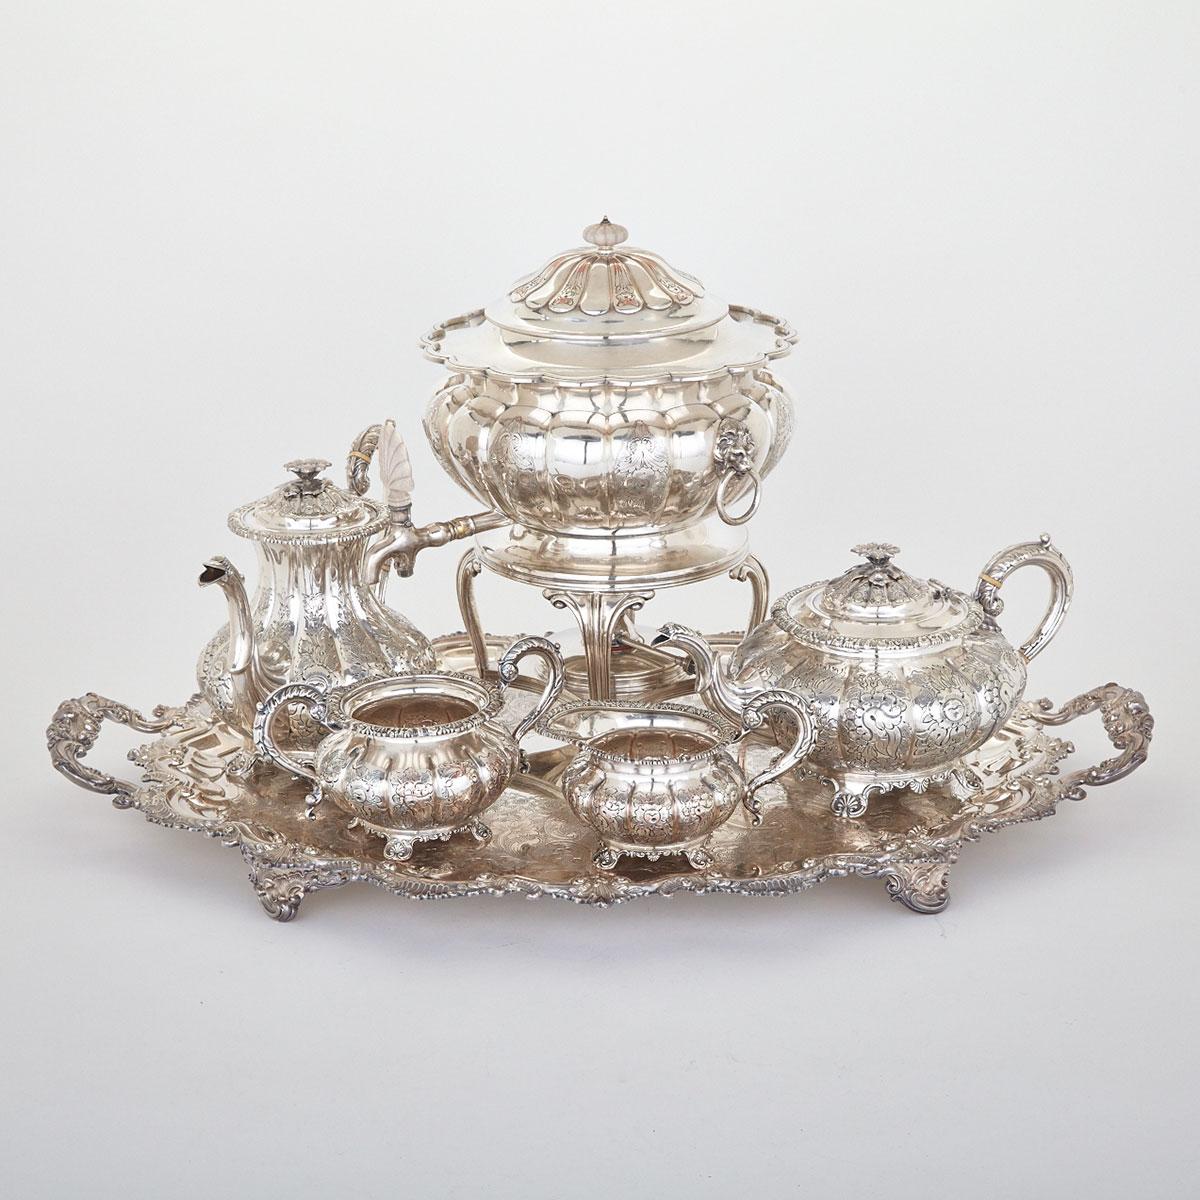 English Silver Plated Tea and Coffee Service, 20th century